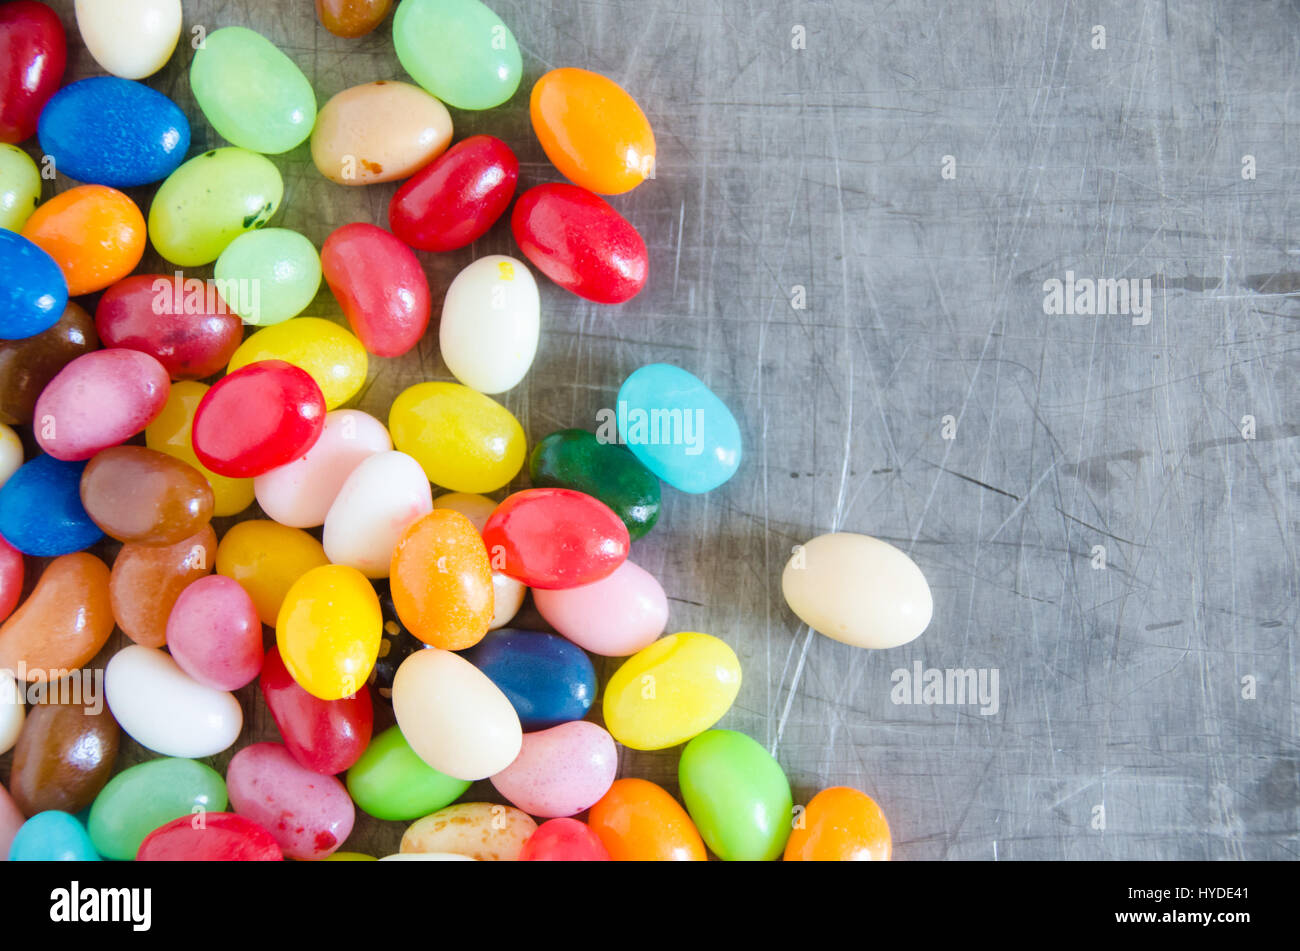 Colorful Candies Stock Photo